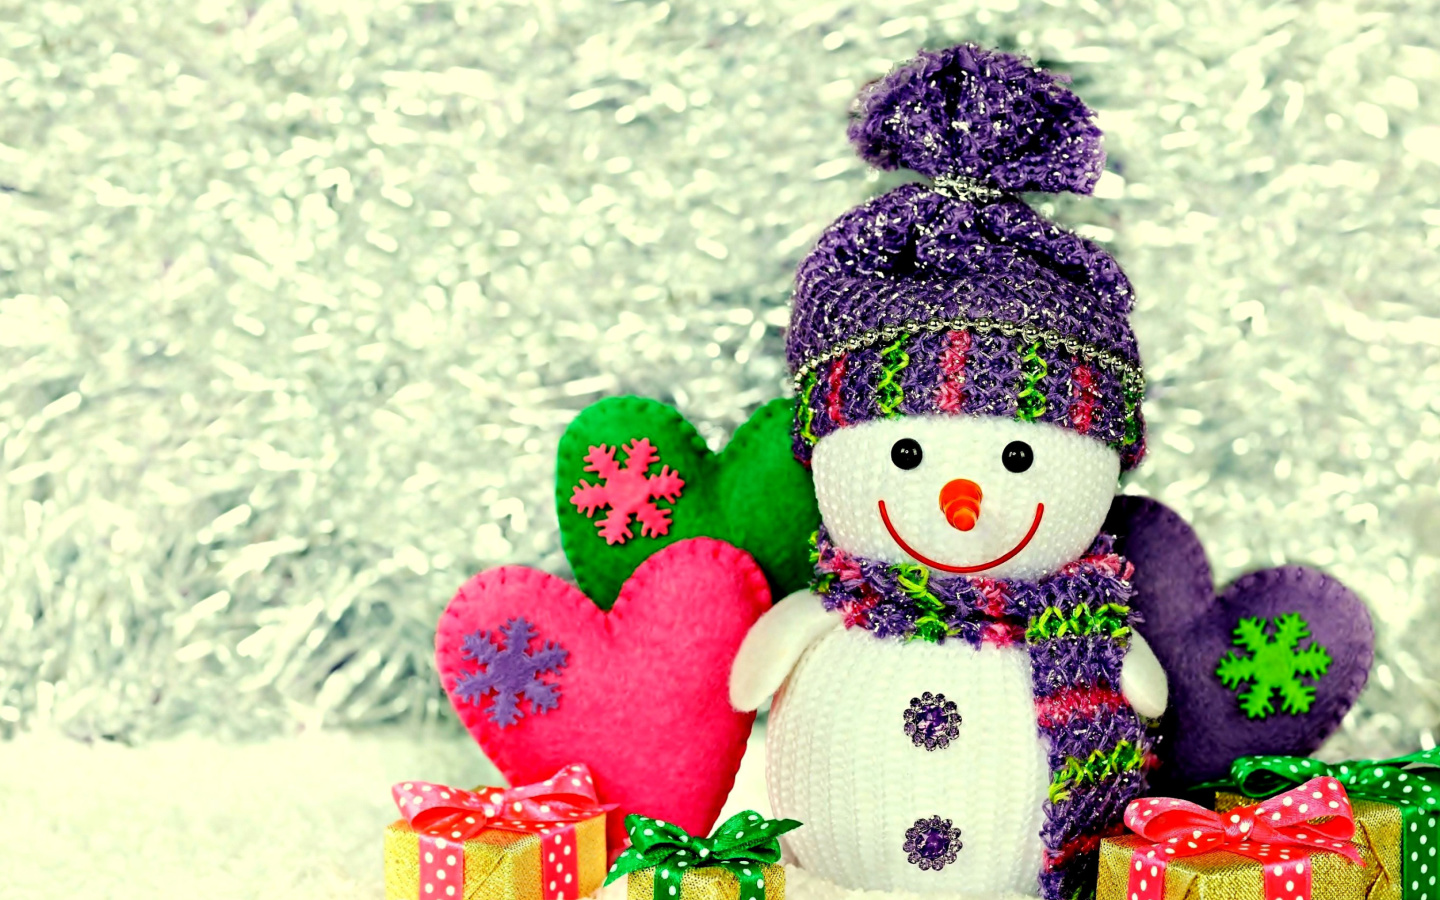 Homemade Snowman with Gifts wallpaper 1440x900